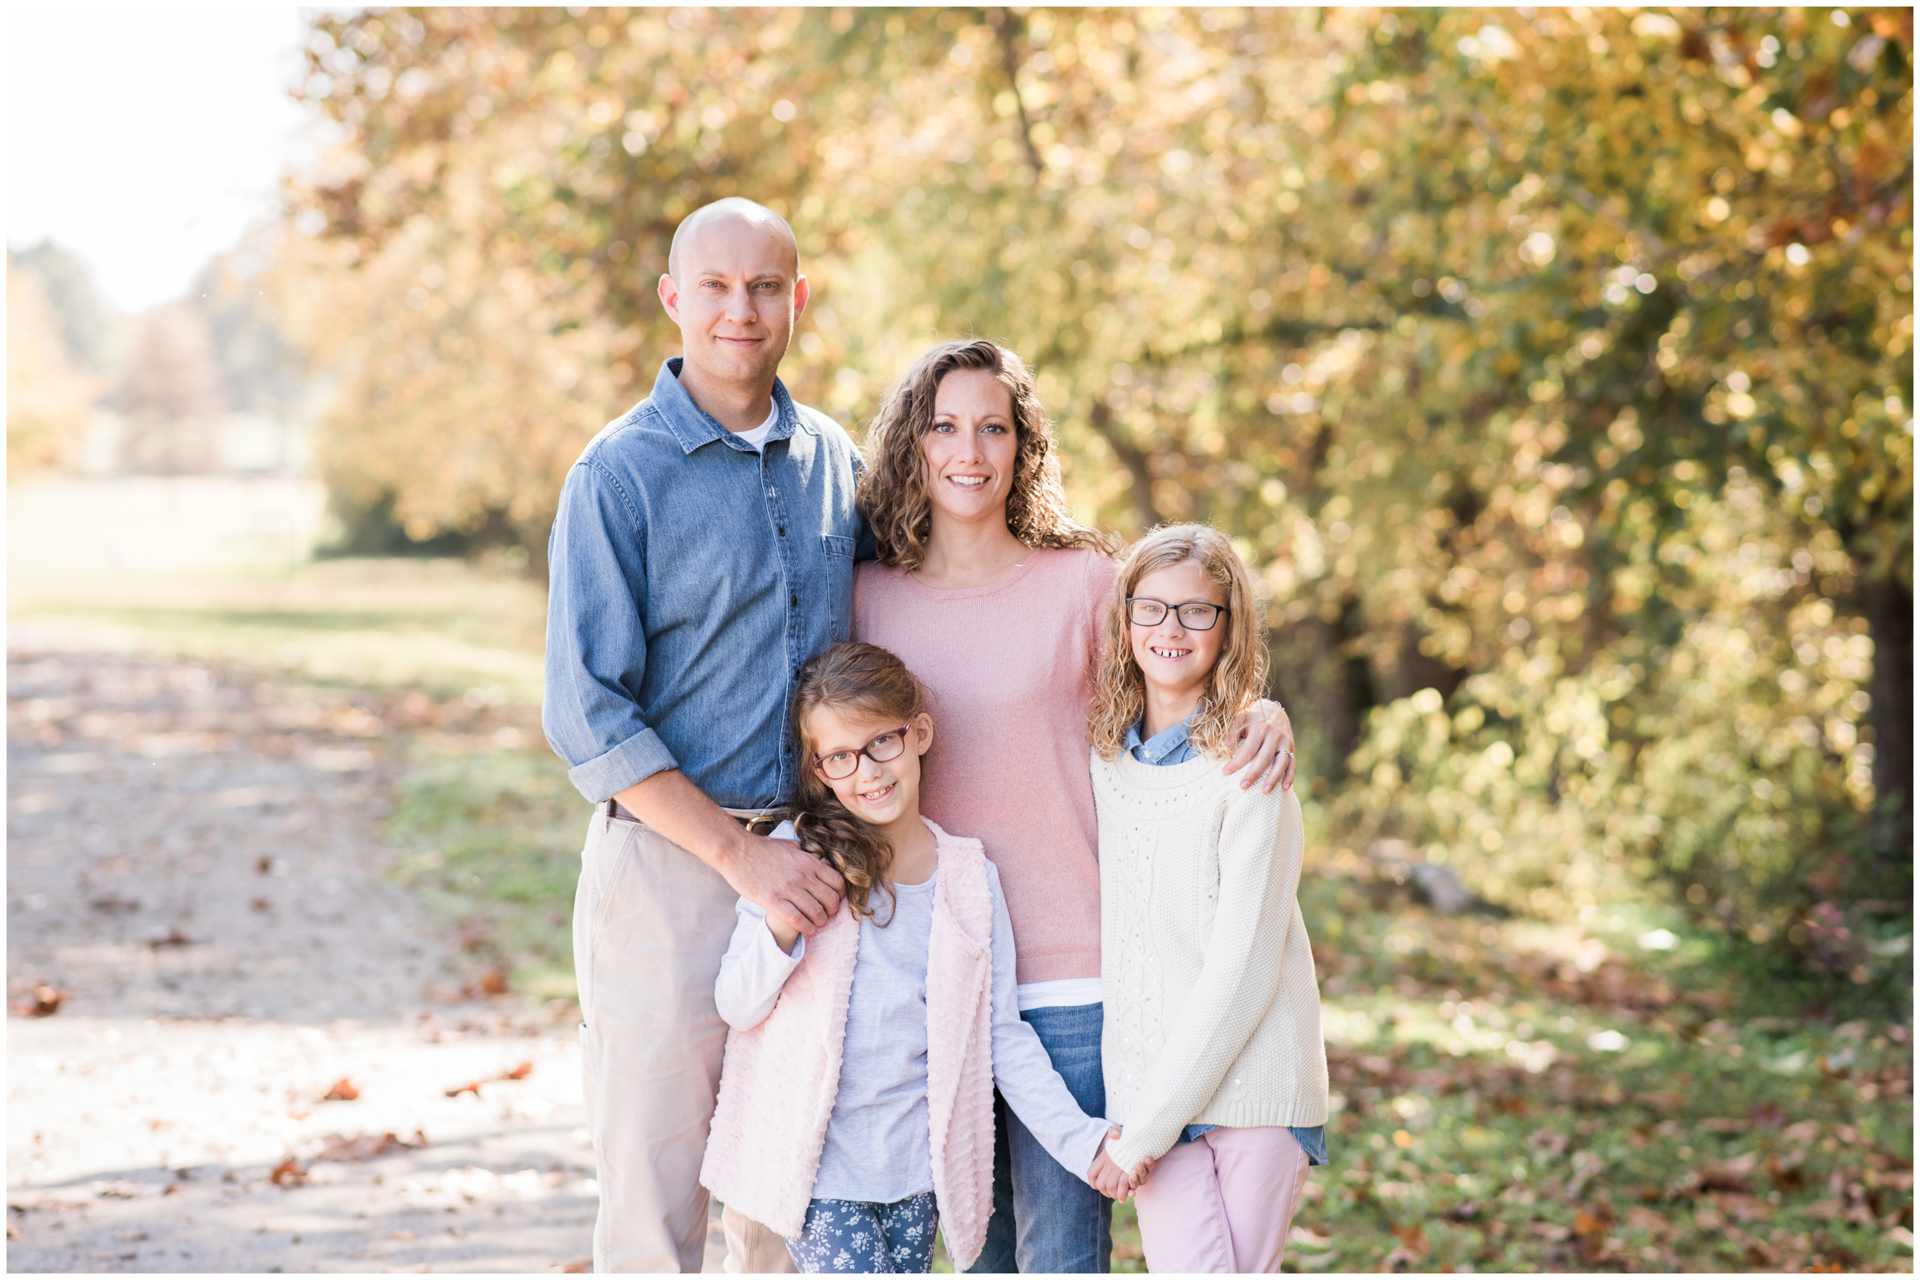 Pose Family of Four - blush pink and blue outfits for fall session